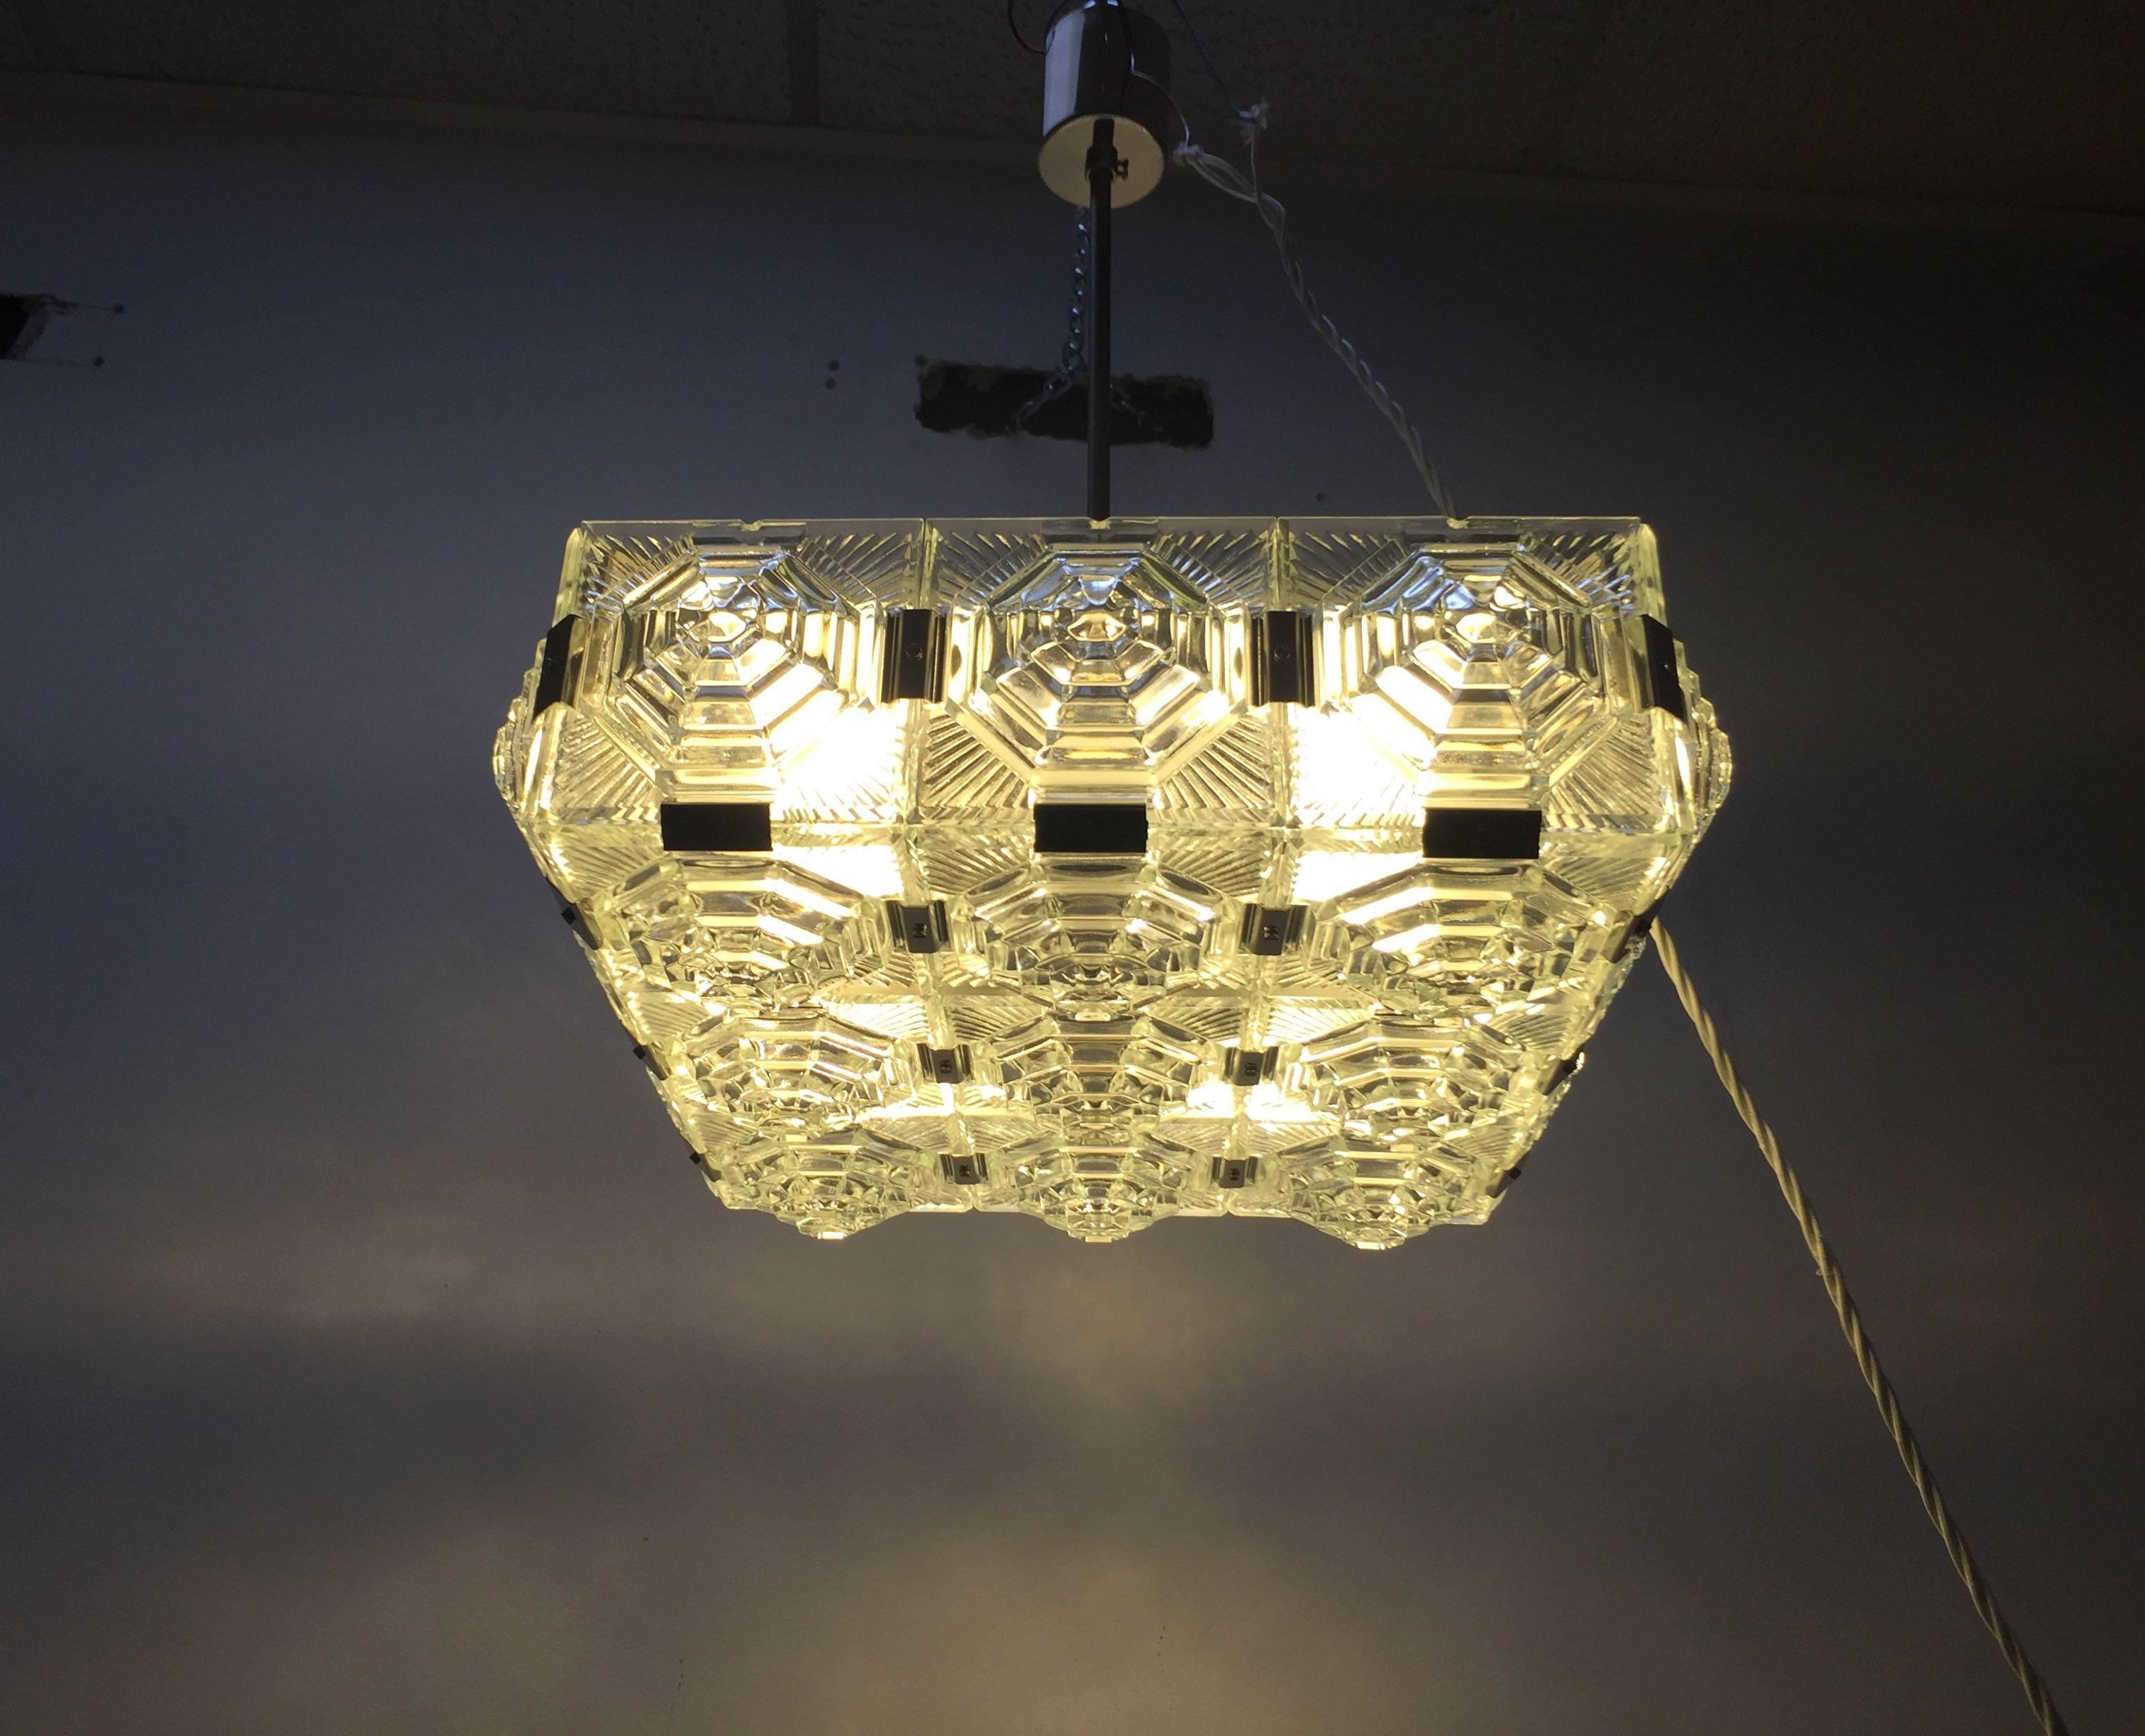 Mid-Century chandelier in the style Kalmar.
It consists of 21 squares each glass with an intricate sunburst design that has been hand etched into the glass.
Each square is individually attached to the next with nickel fittings giving the